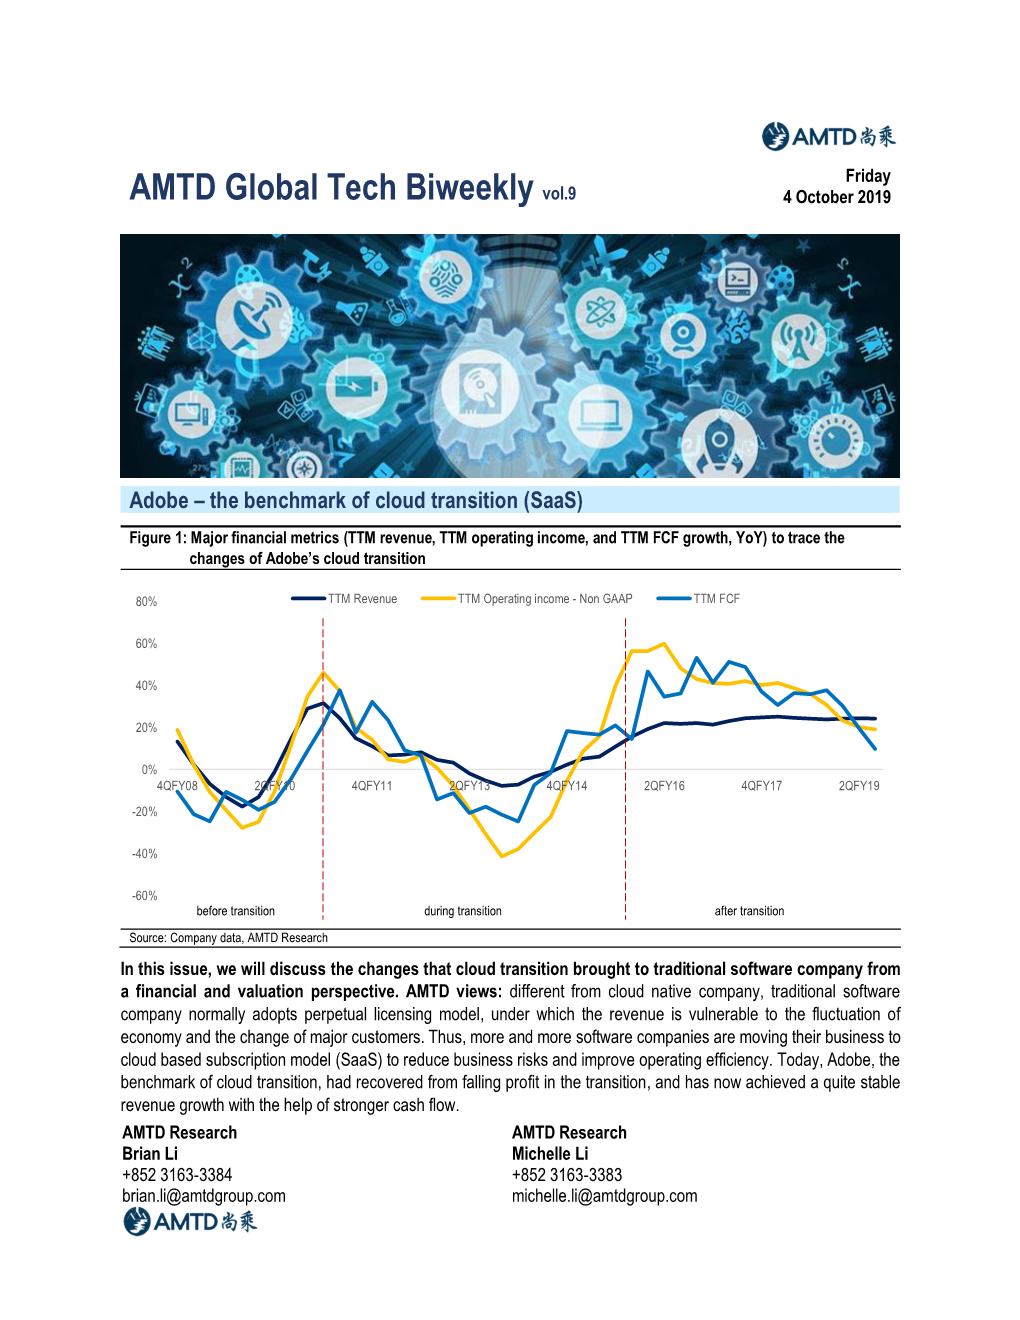 Global Tech Biweekly Vol.9 Oct 4, 2019 in This Issue